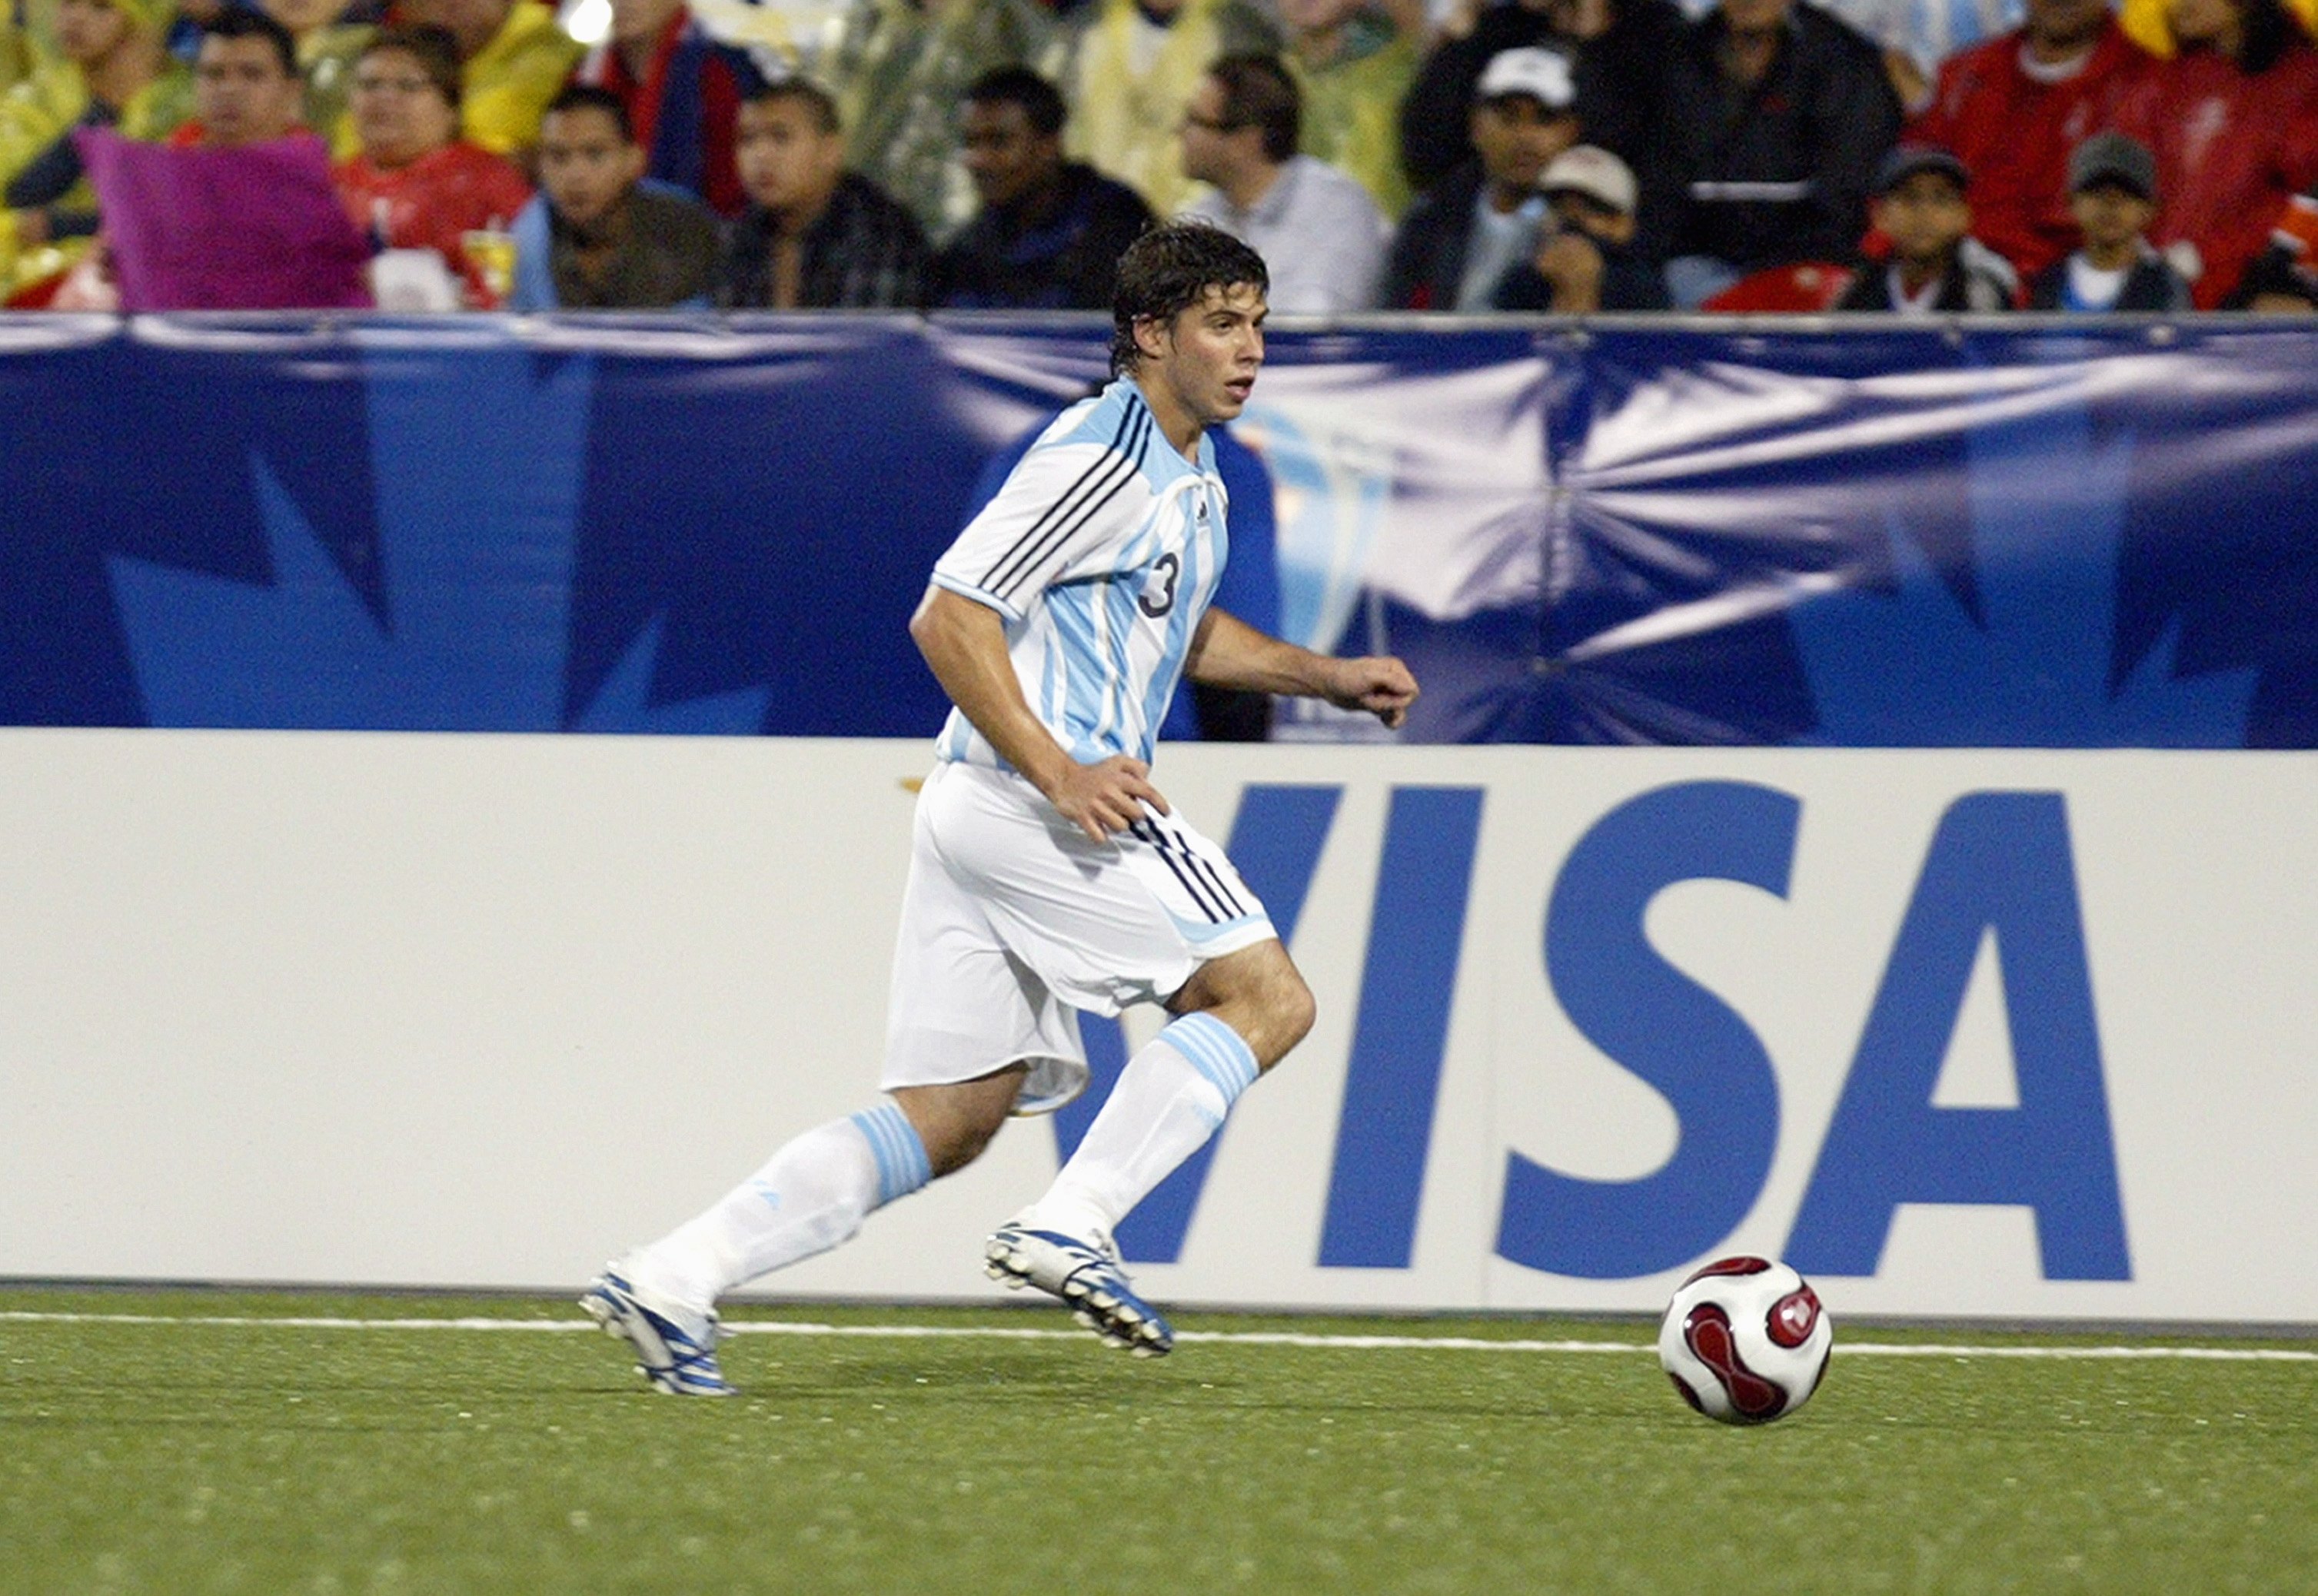 TORONTO - JULY 20:  Emiliano Insua #3 of Argentina moves the ball on the left side during their FIFA U-20 World Cup Canada 2007 semifinal game against Chile at BMO Field on July 20, 2007 in Toronto, Ontario, Canada. (Photo By Dave Sandford/Getty Images)